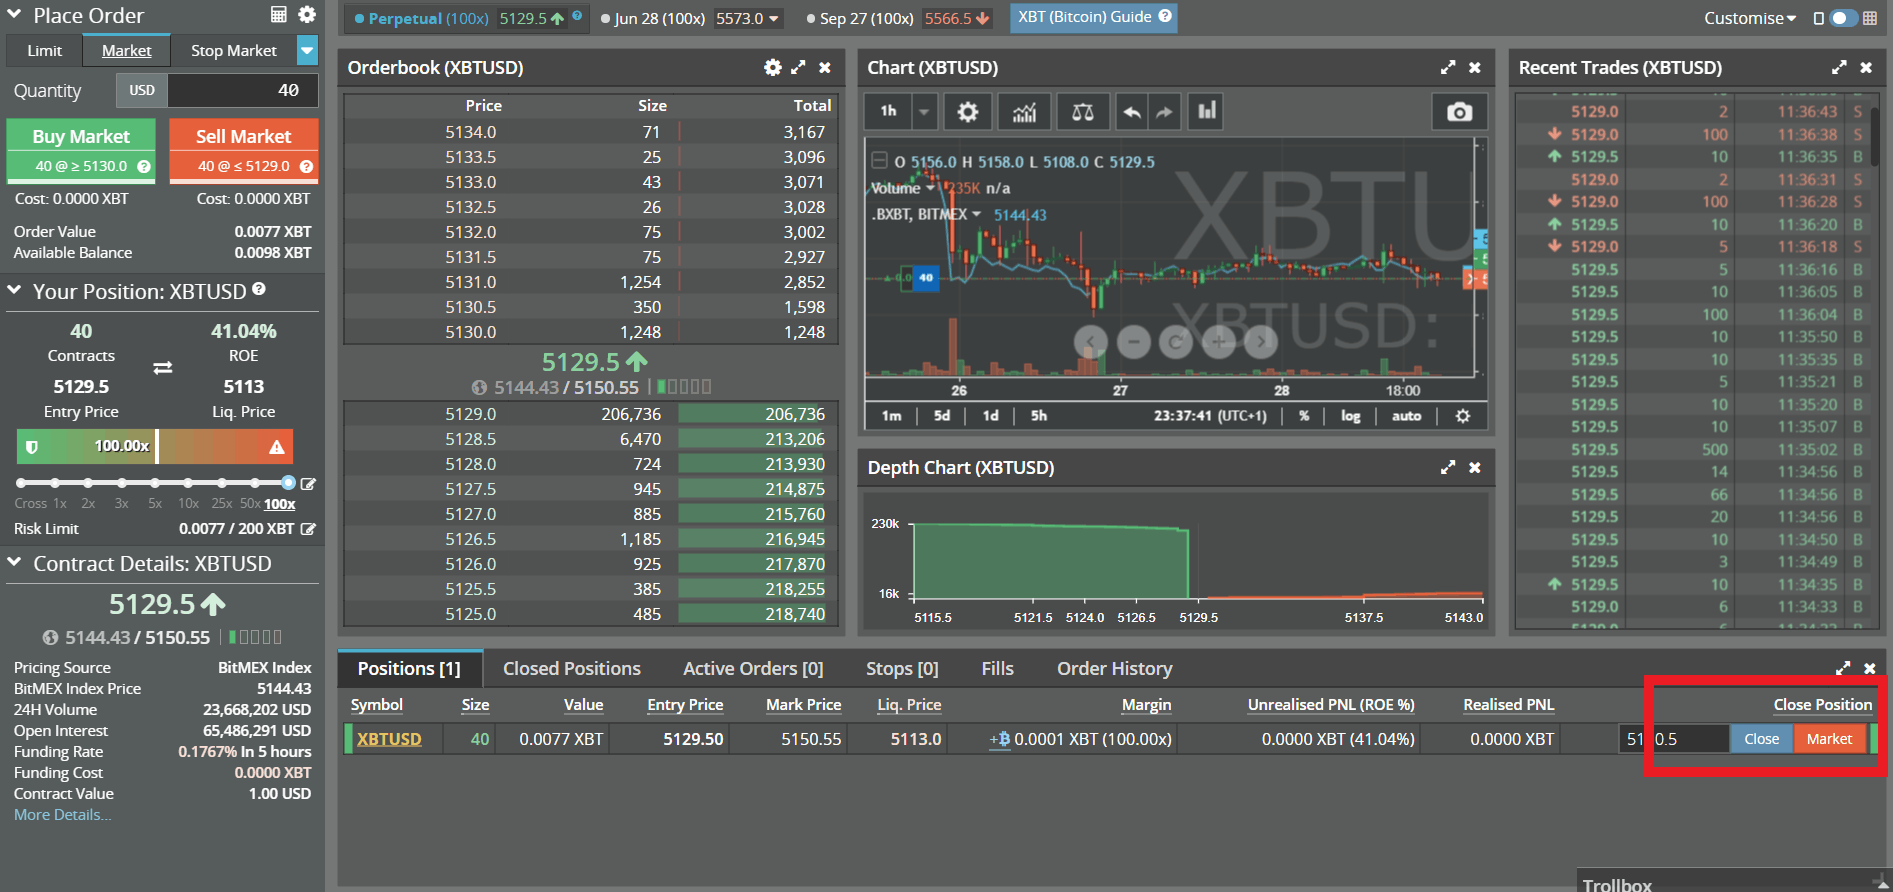 How to Close a Position on BitMEX